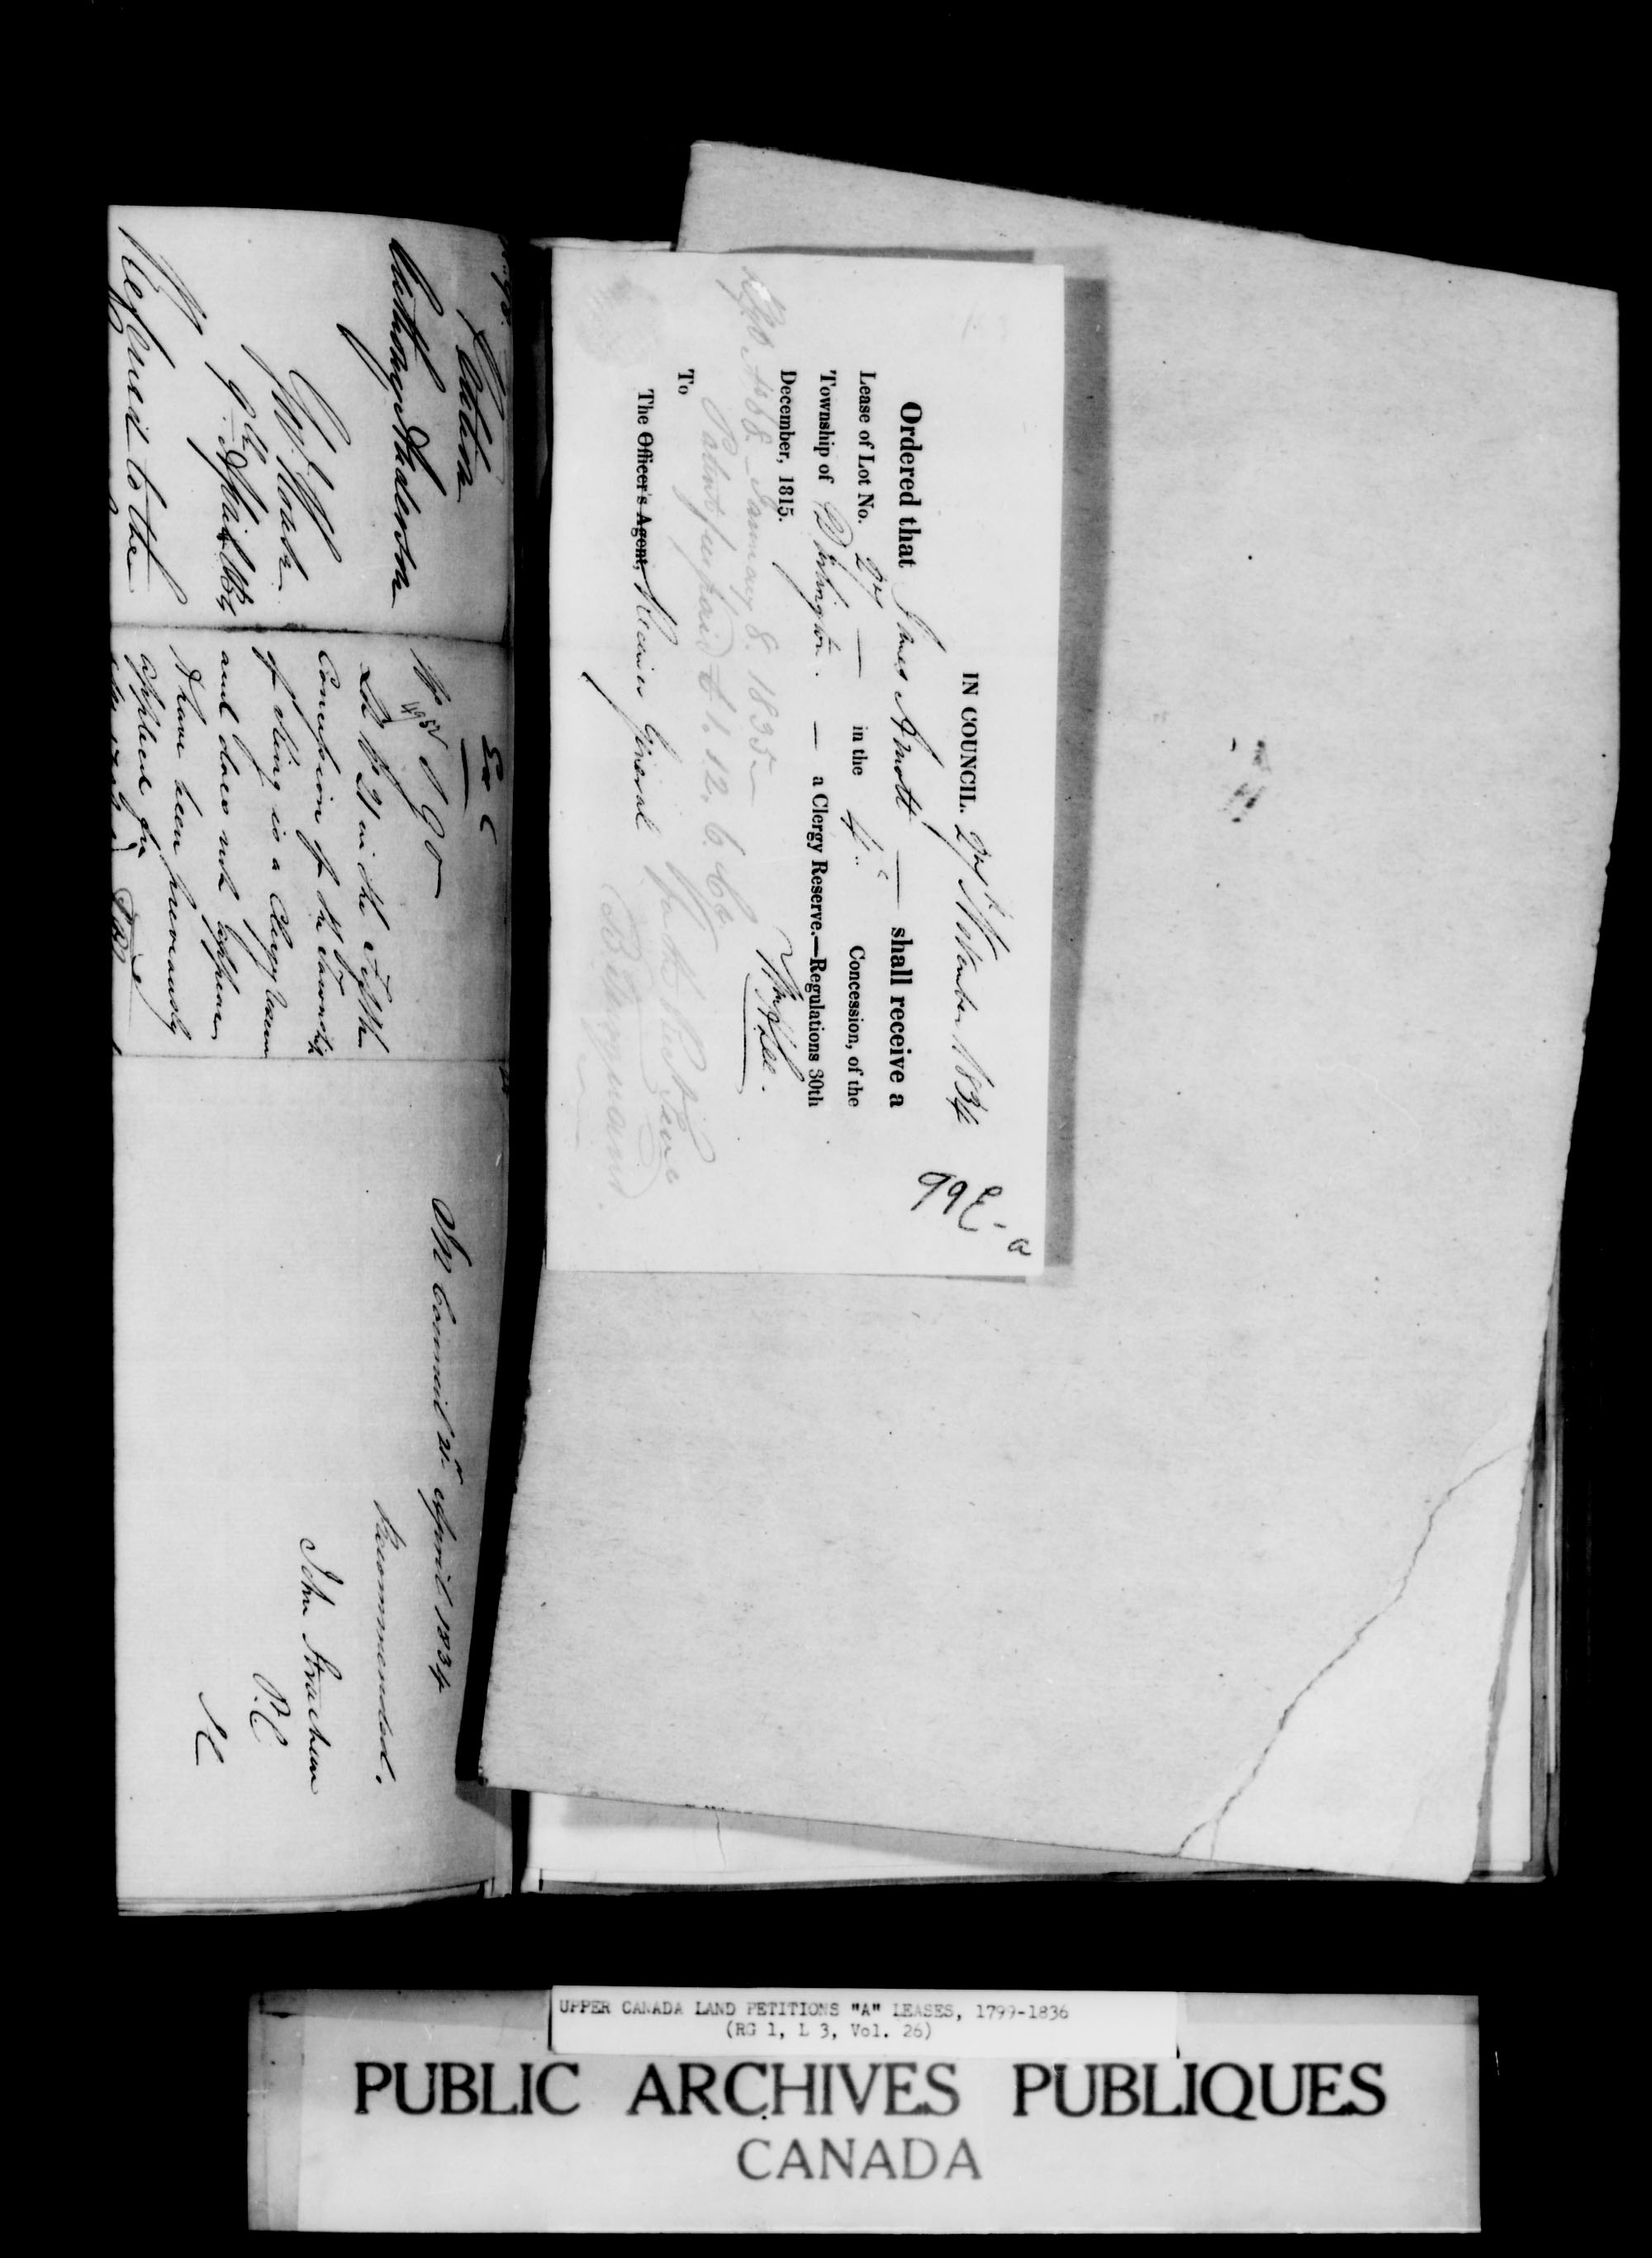 Title: Upper Canada Land Petitions (1763-1865) - Mikan Number: 205131 - Microform: c-1618